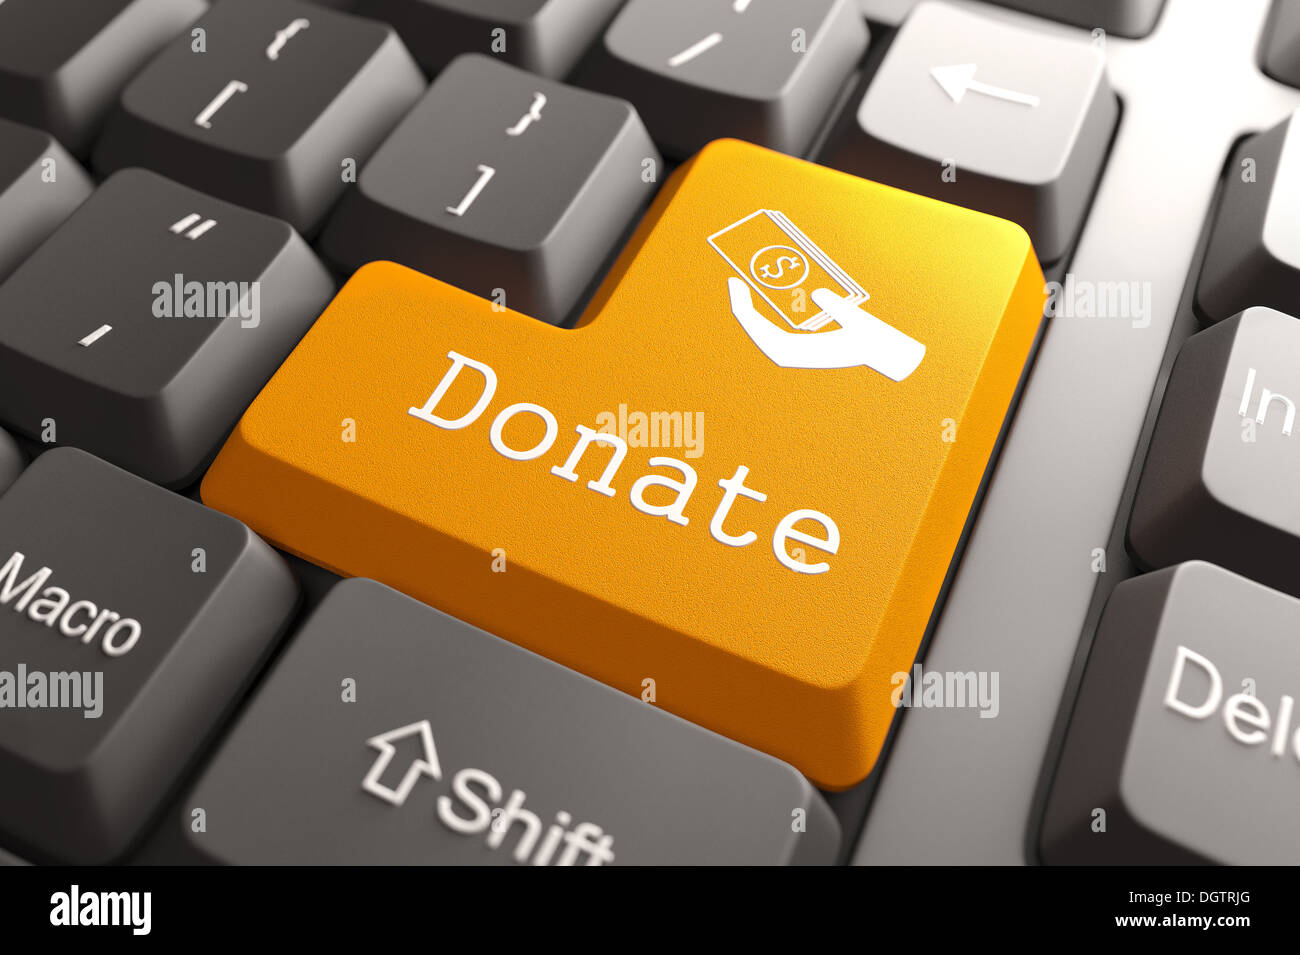 Keyboard with Donate Button. Stock Photo